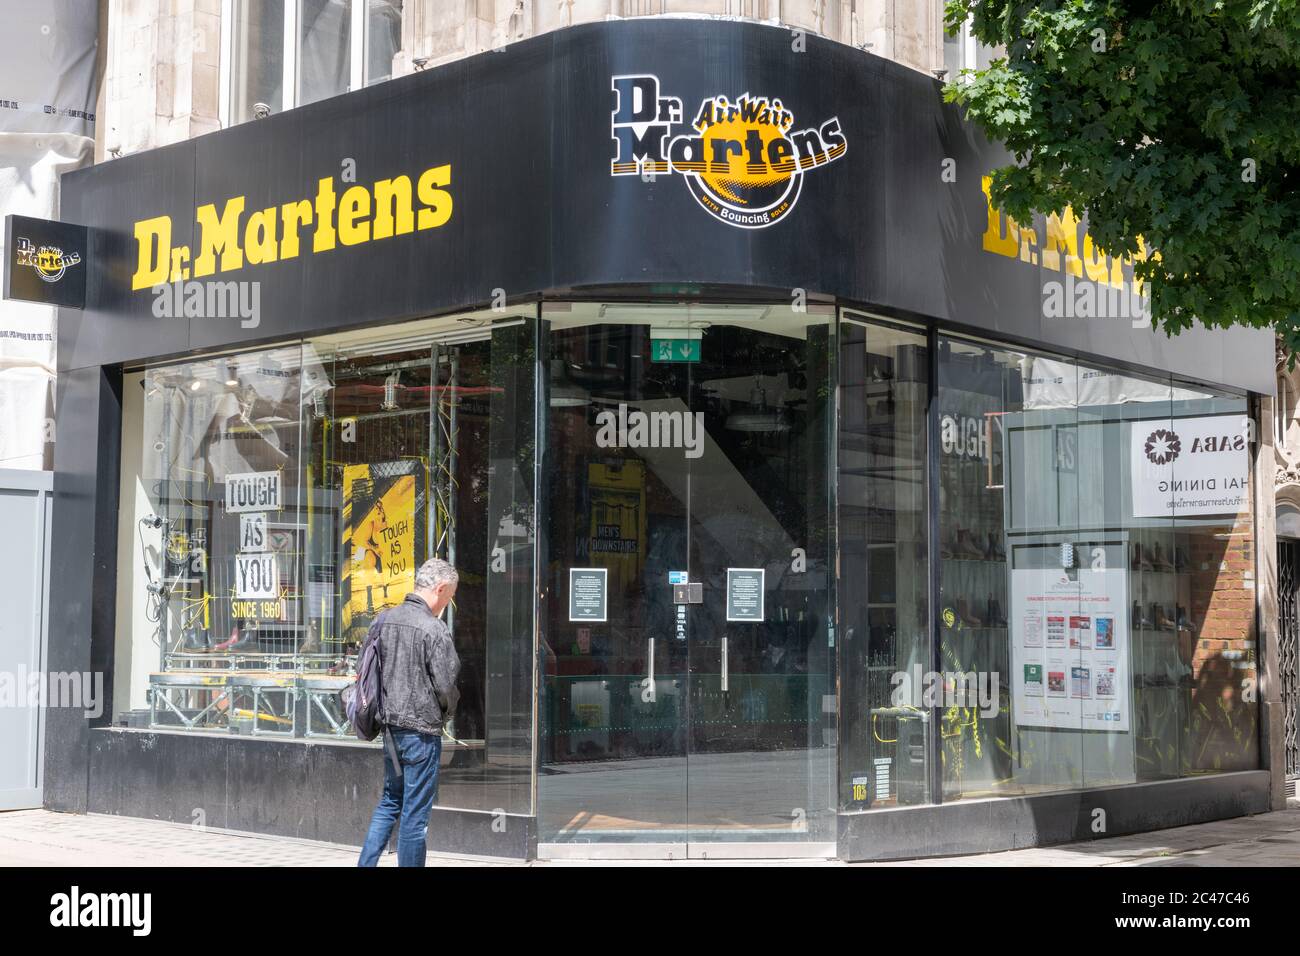 A retail shop of the British footwear manufacturer Dr. Martens. Famous for their leather boots. Stock Photo